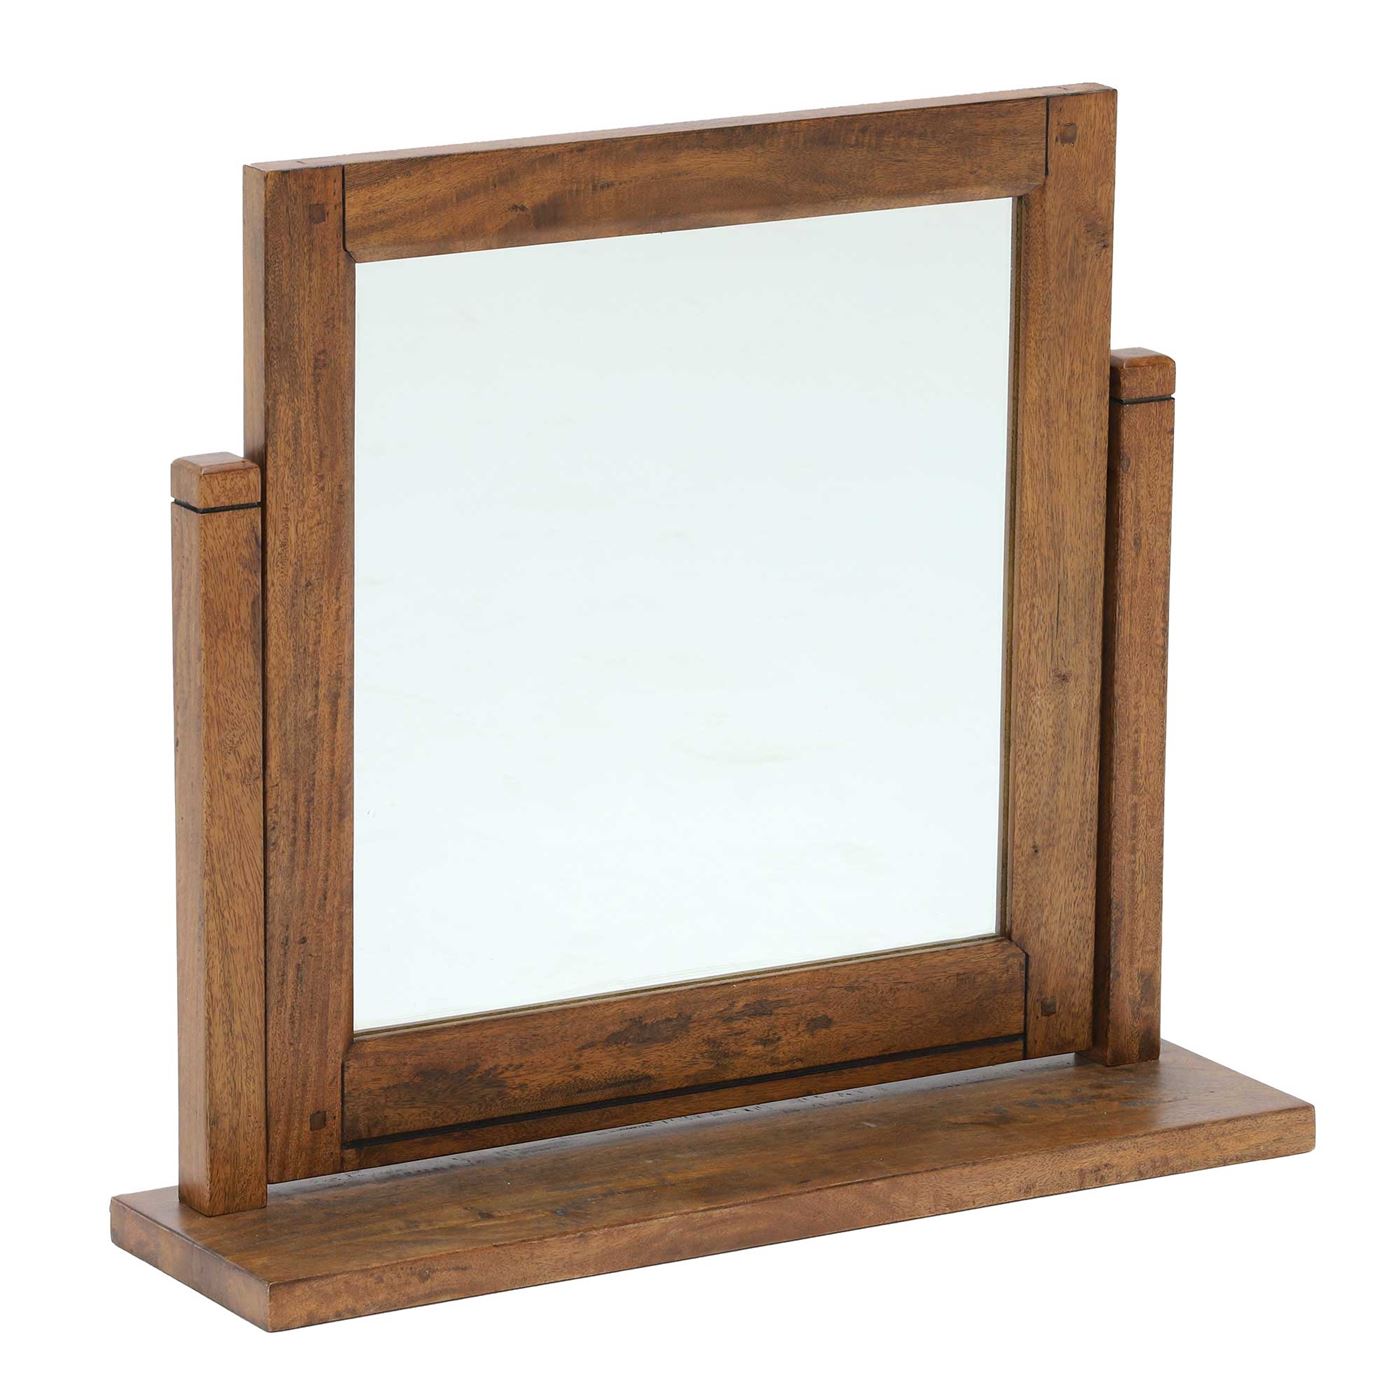 New Frontier Gallery Mirror, Square, Mango Wood | Barker & Stonehouse